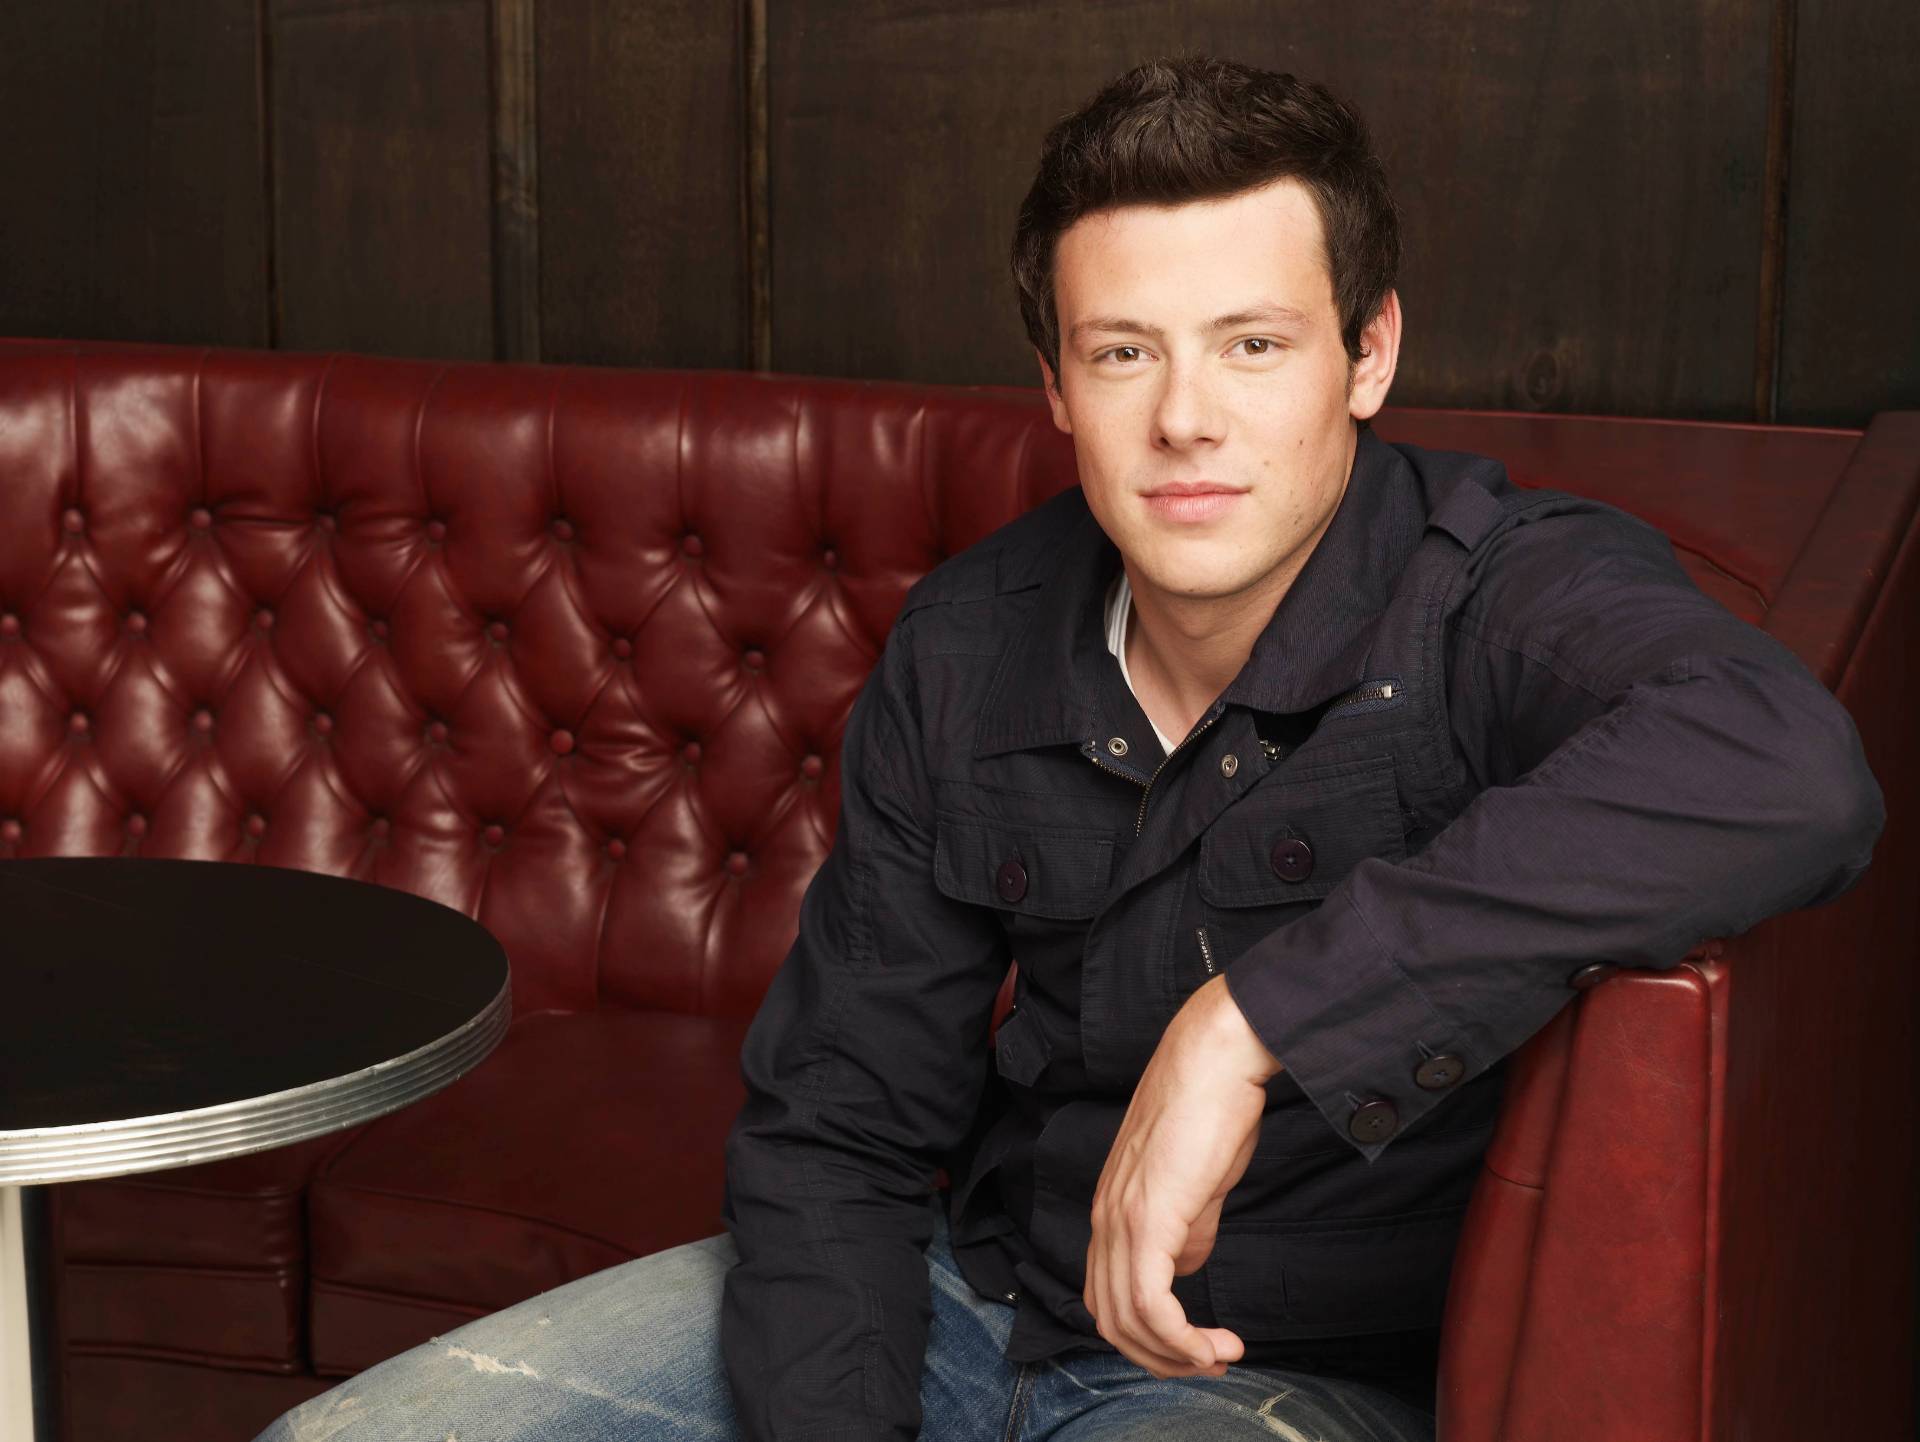 Cory Monteith | FOX Image Collection via Getty Images